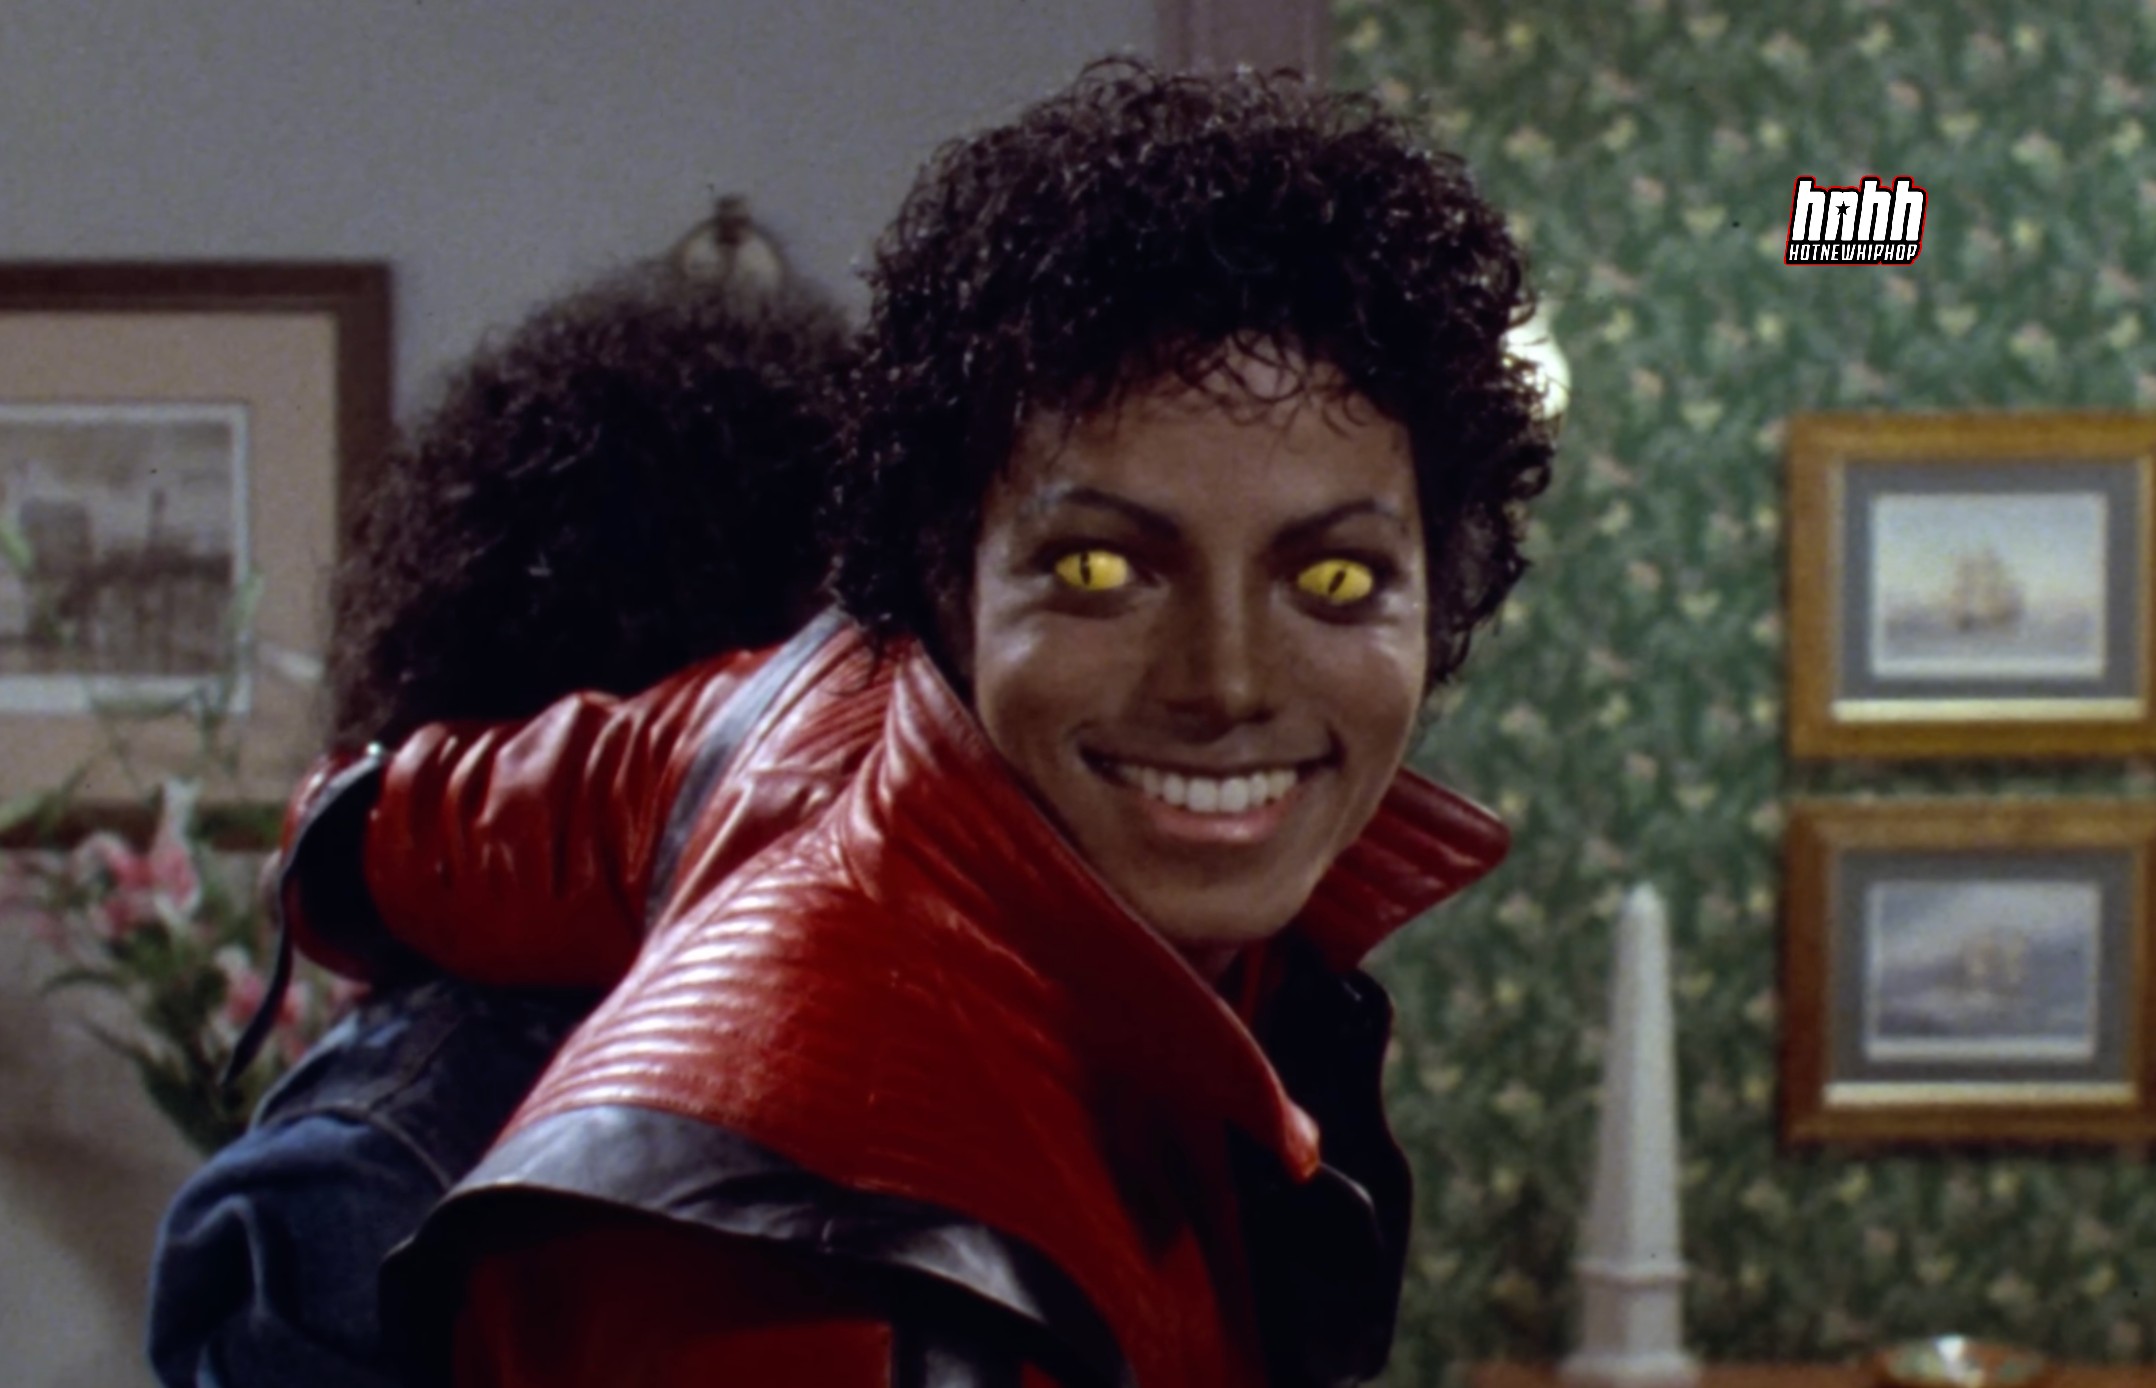 Michael Jackson: Behind the Scenes of His Iconic 'Thriller' Music